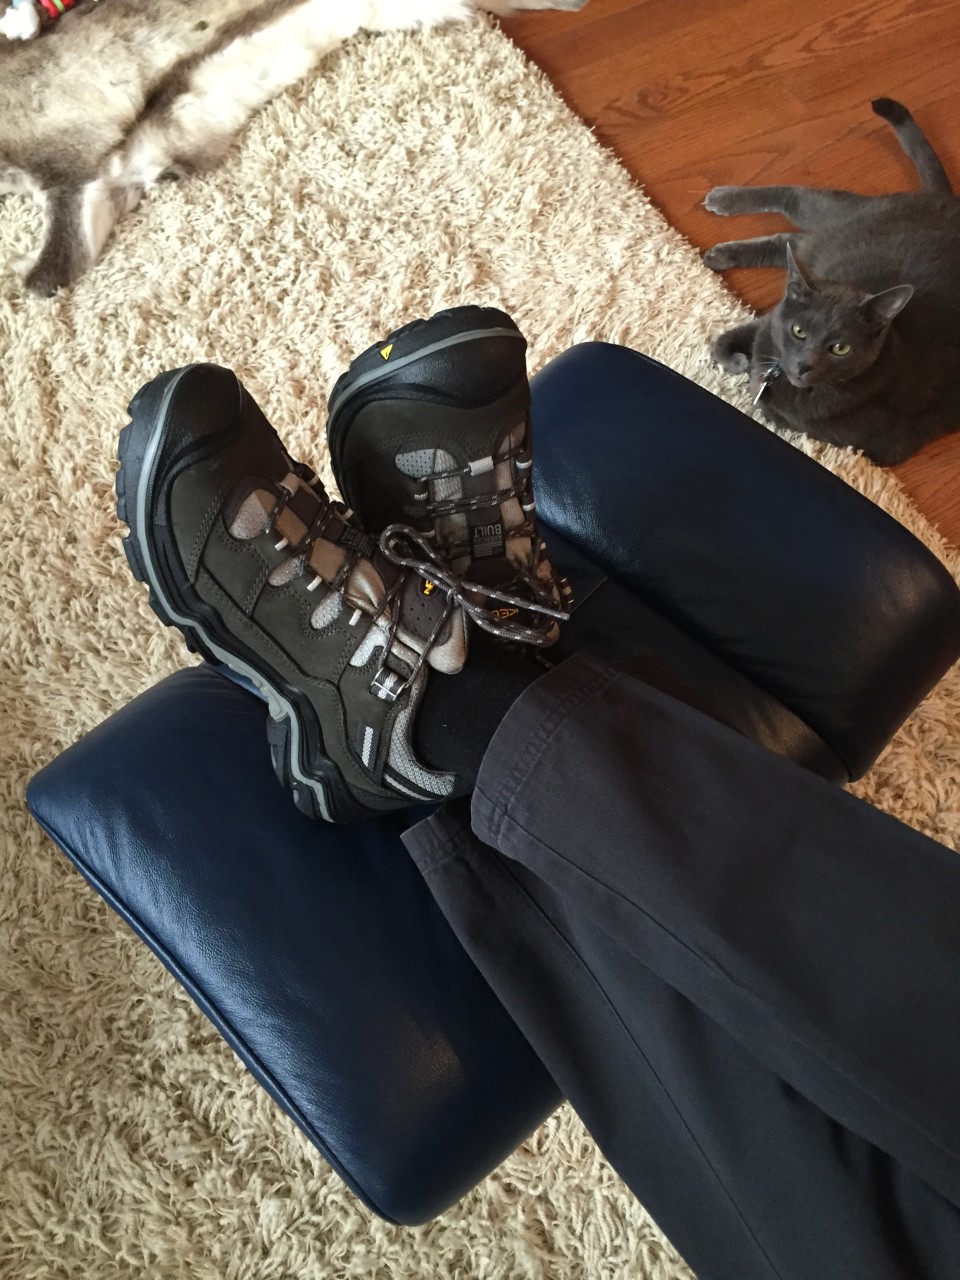 Travel Essentials for the frequent world traveler : Our cat Beaudelaire (Beau for short) admiring my Keen waterproof hiking shoes